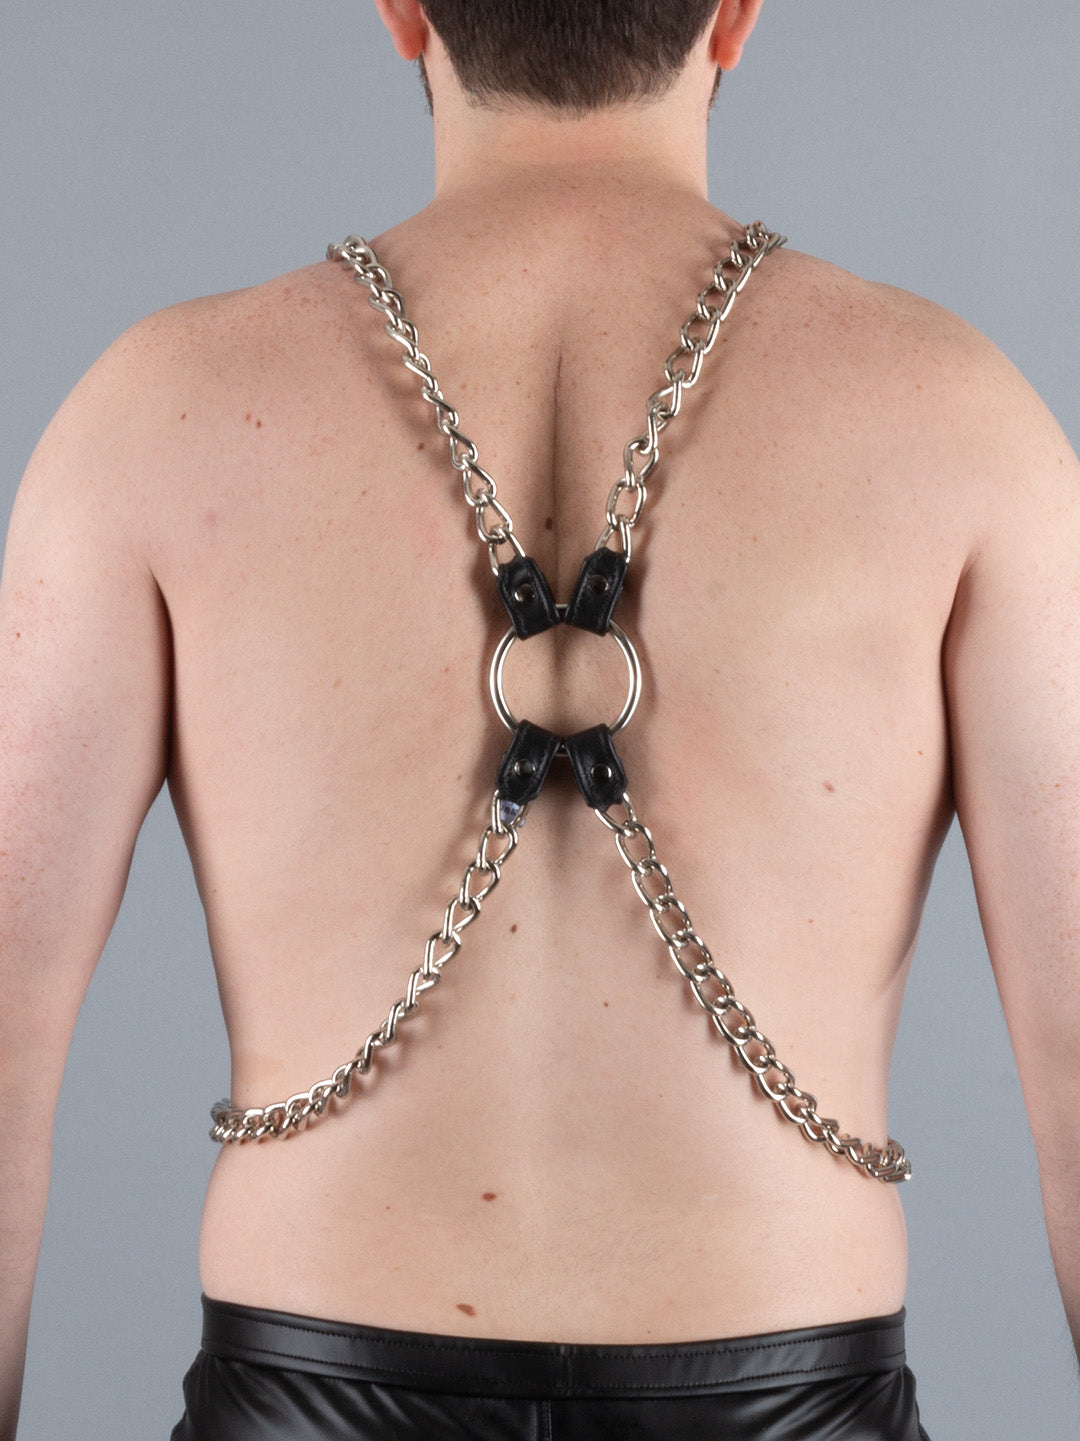 Chain Harness with Leather Accents